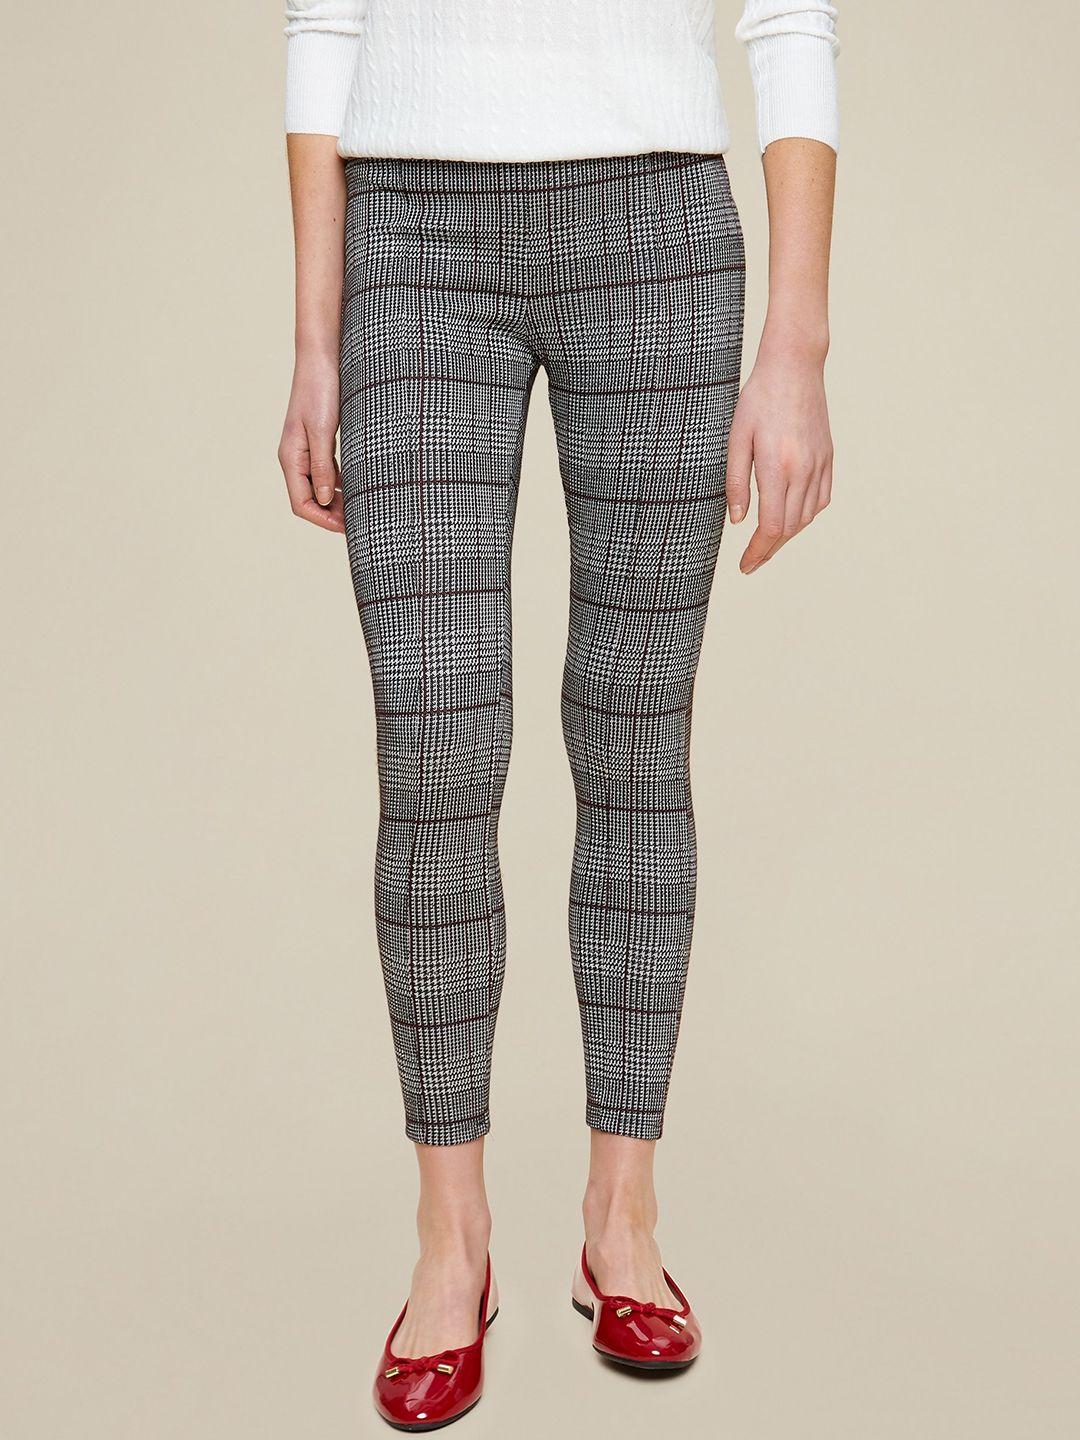 dorothy-perkins-women-black-&-off-white-houndstooth-patterned-cropped-treggings